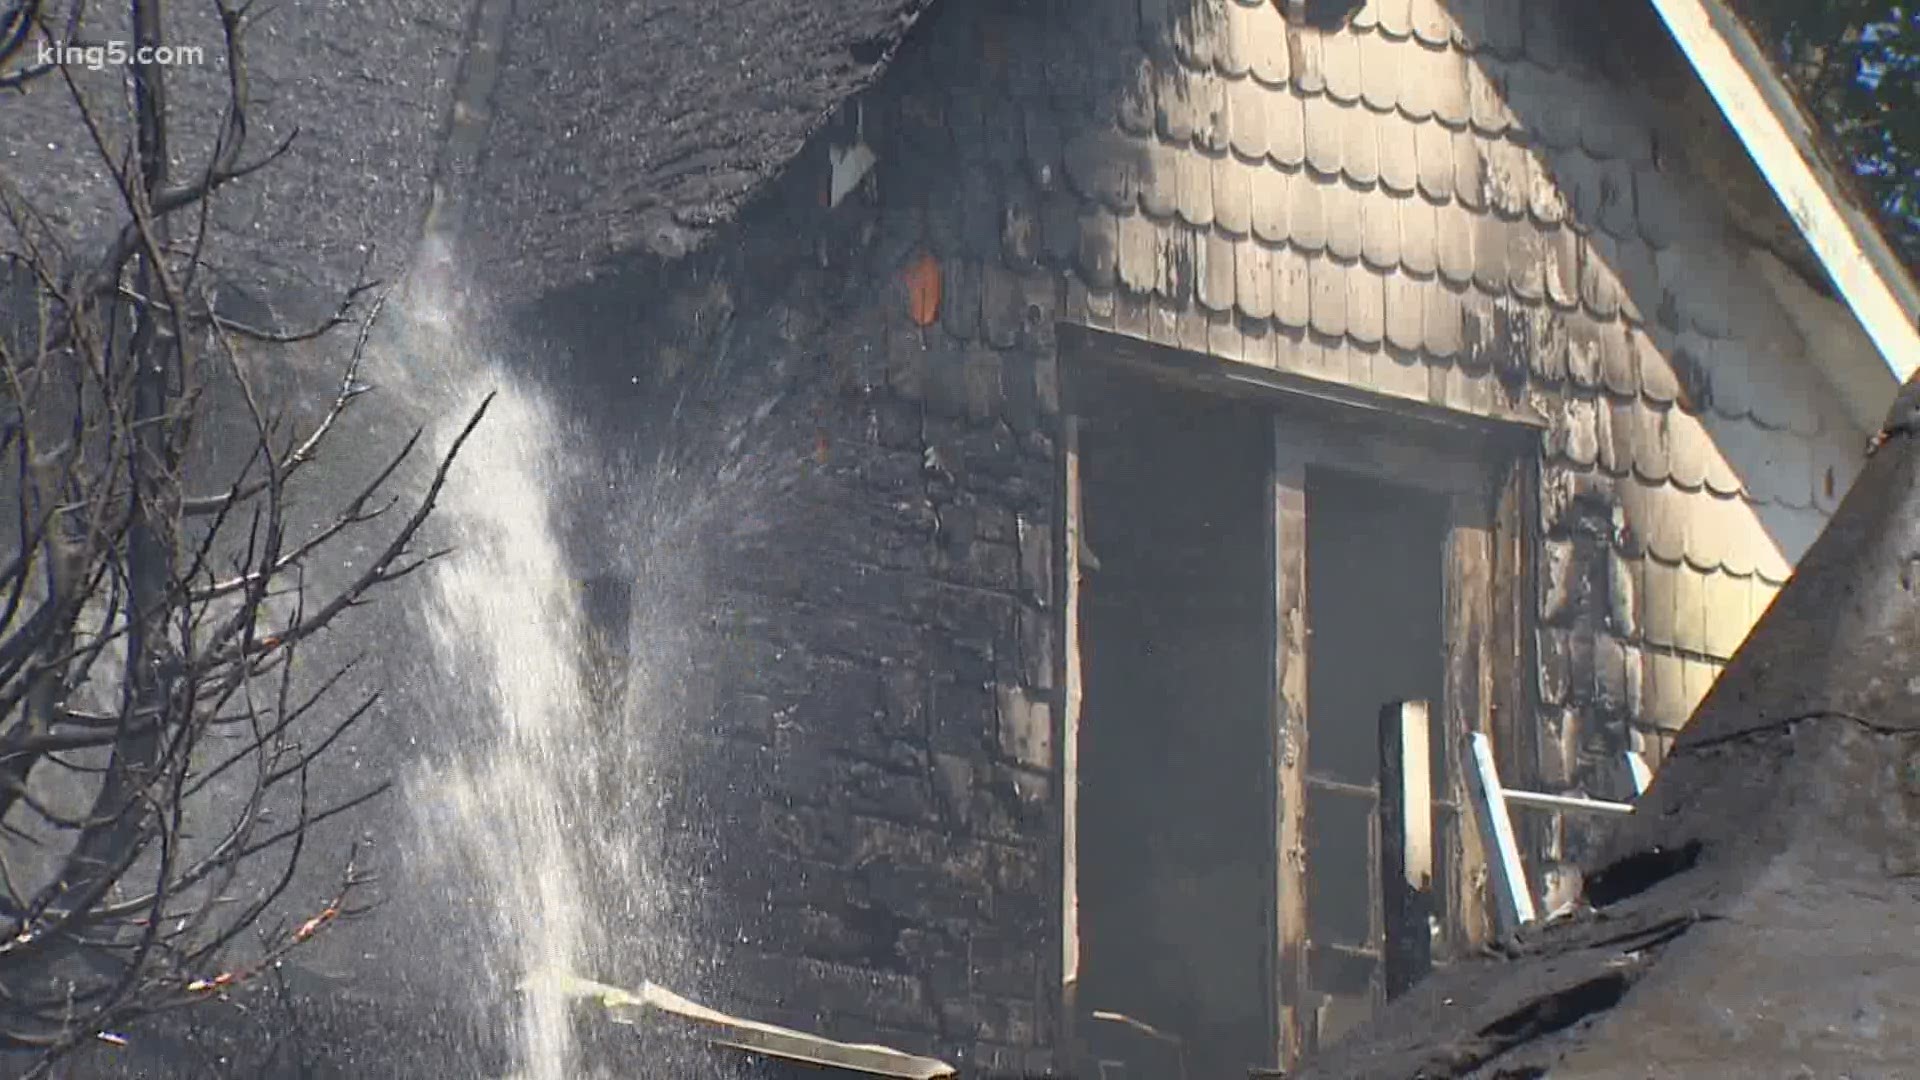 An elderly woman and a man were able to escape, but one man (the woman's son) was killed in the fire.